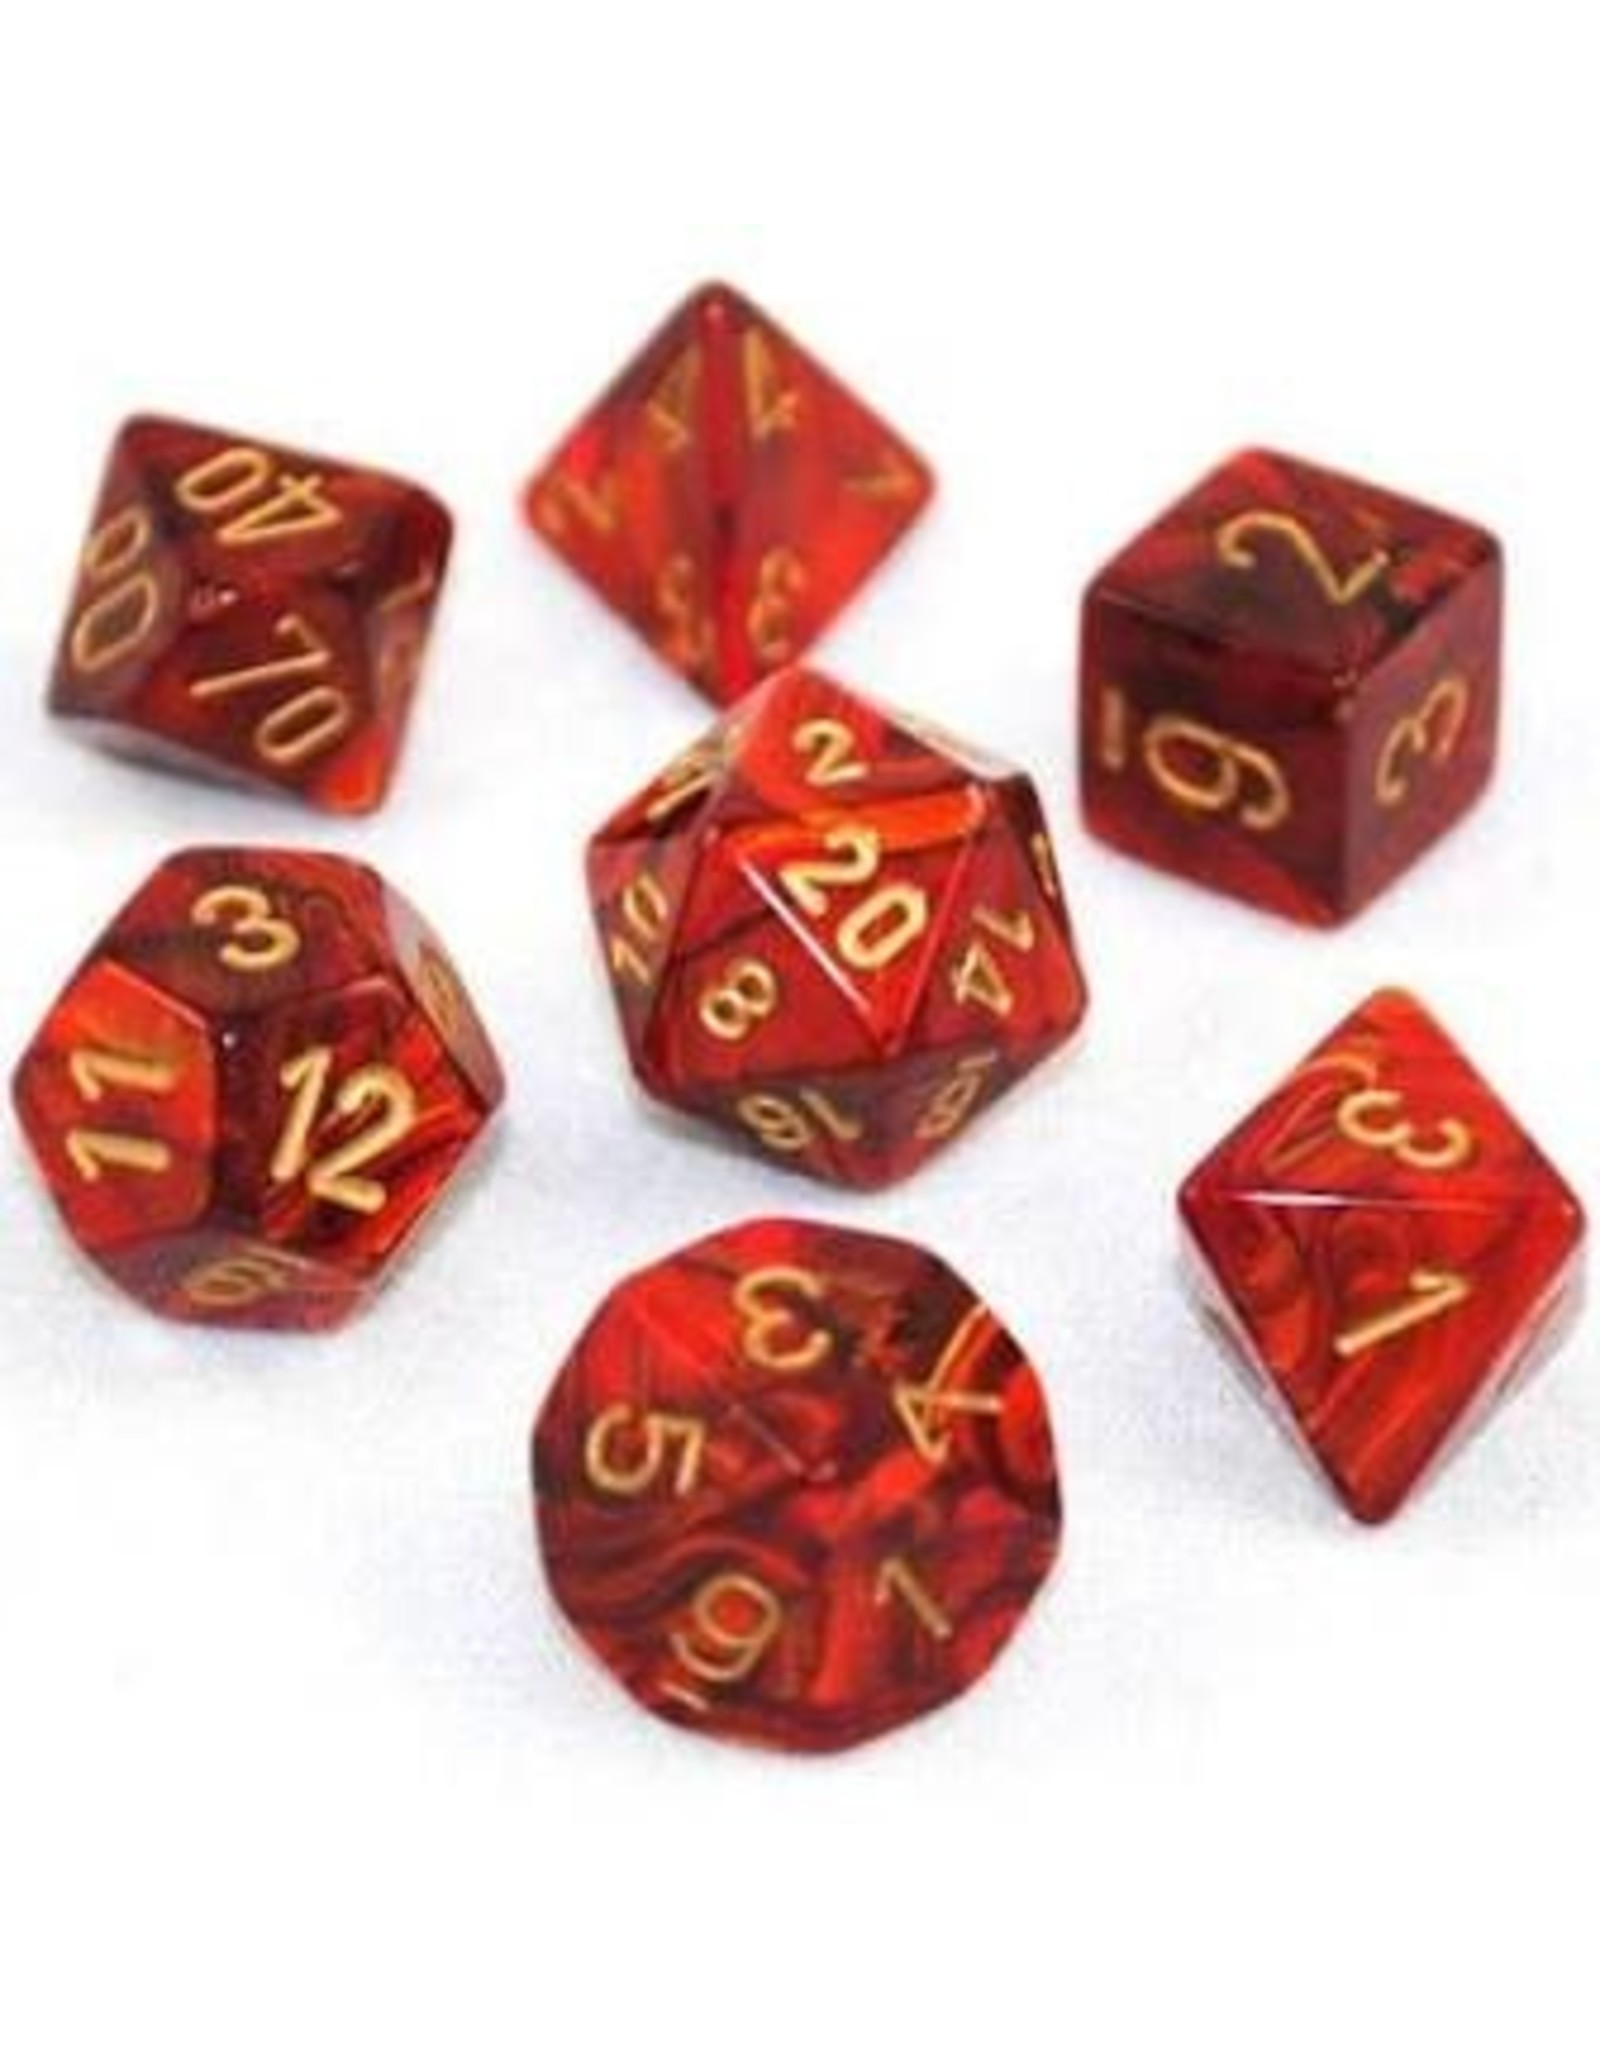 Chessex 7-Set Polyhedral Scarab Scarlet /Gold